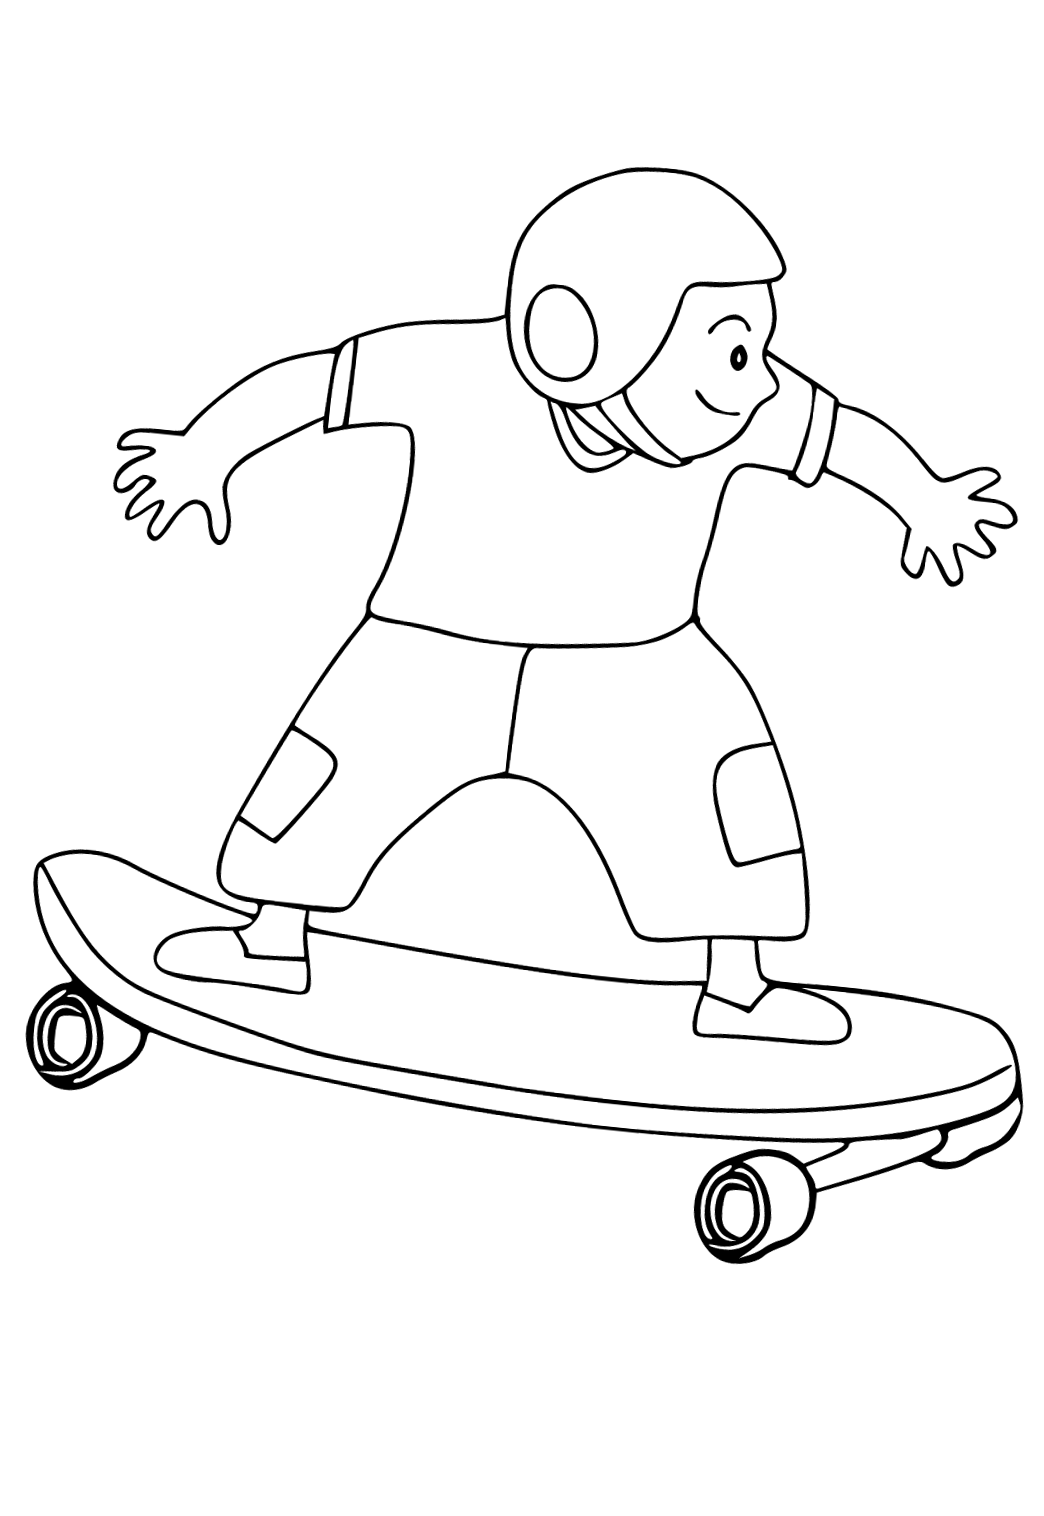 Free printable skateboard helmet coloring page for adults and kids